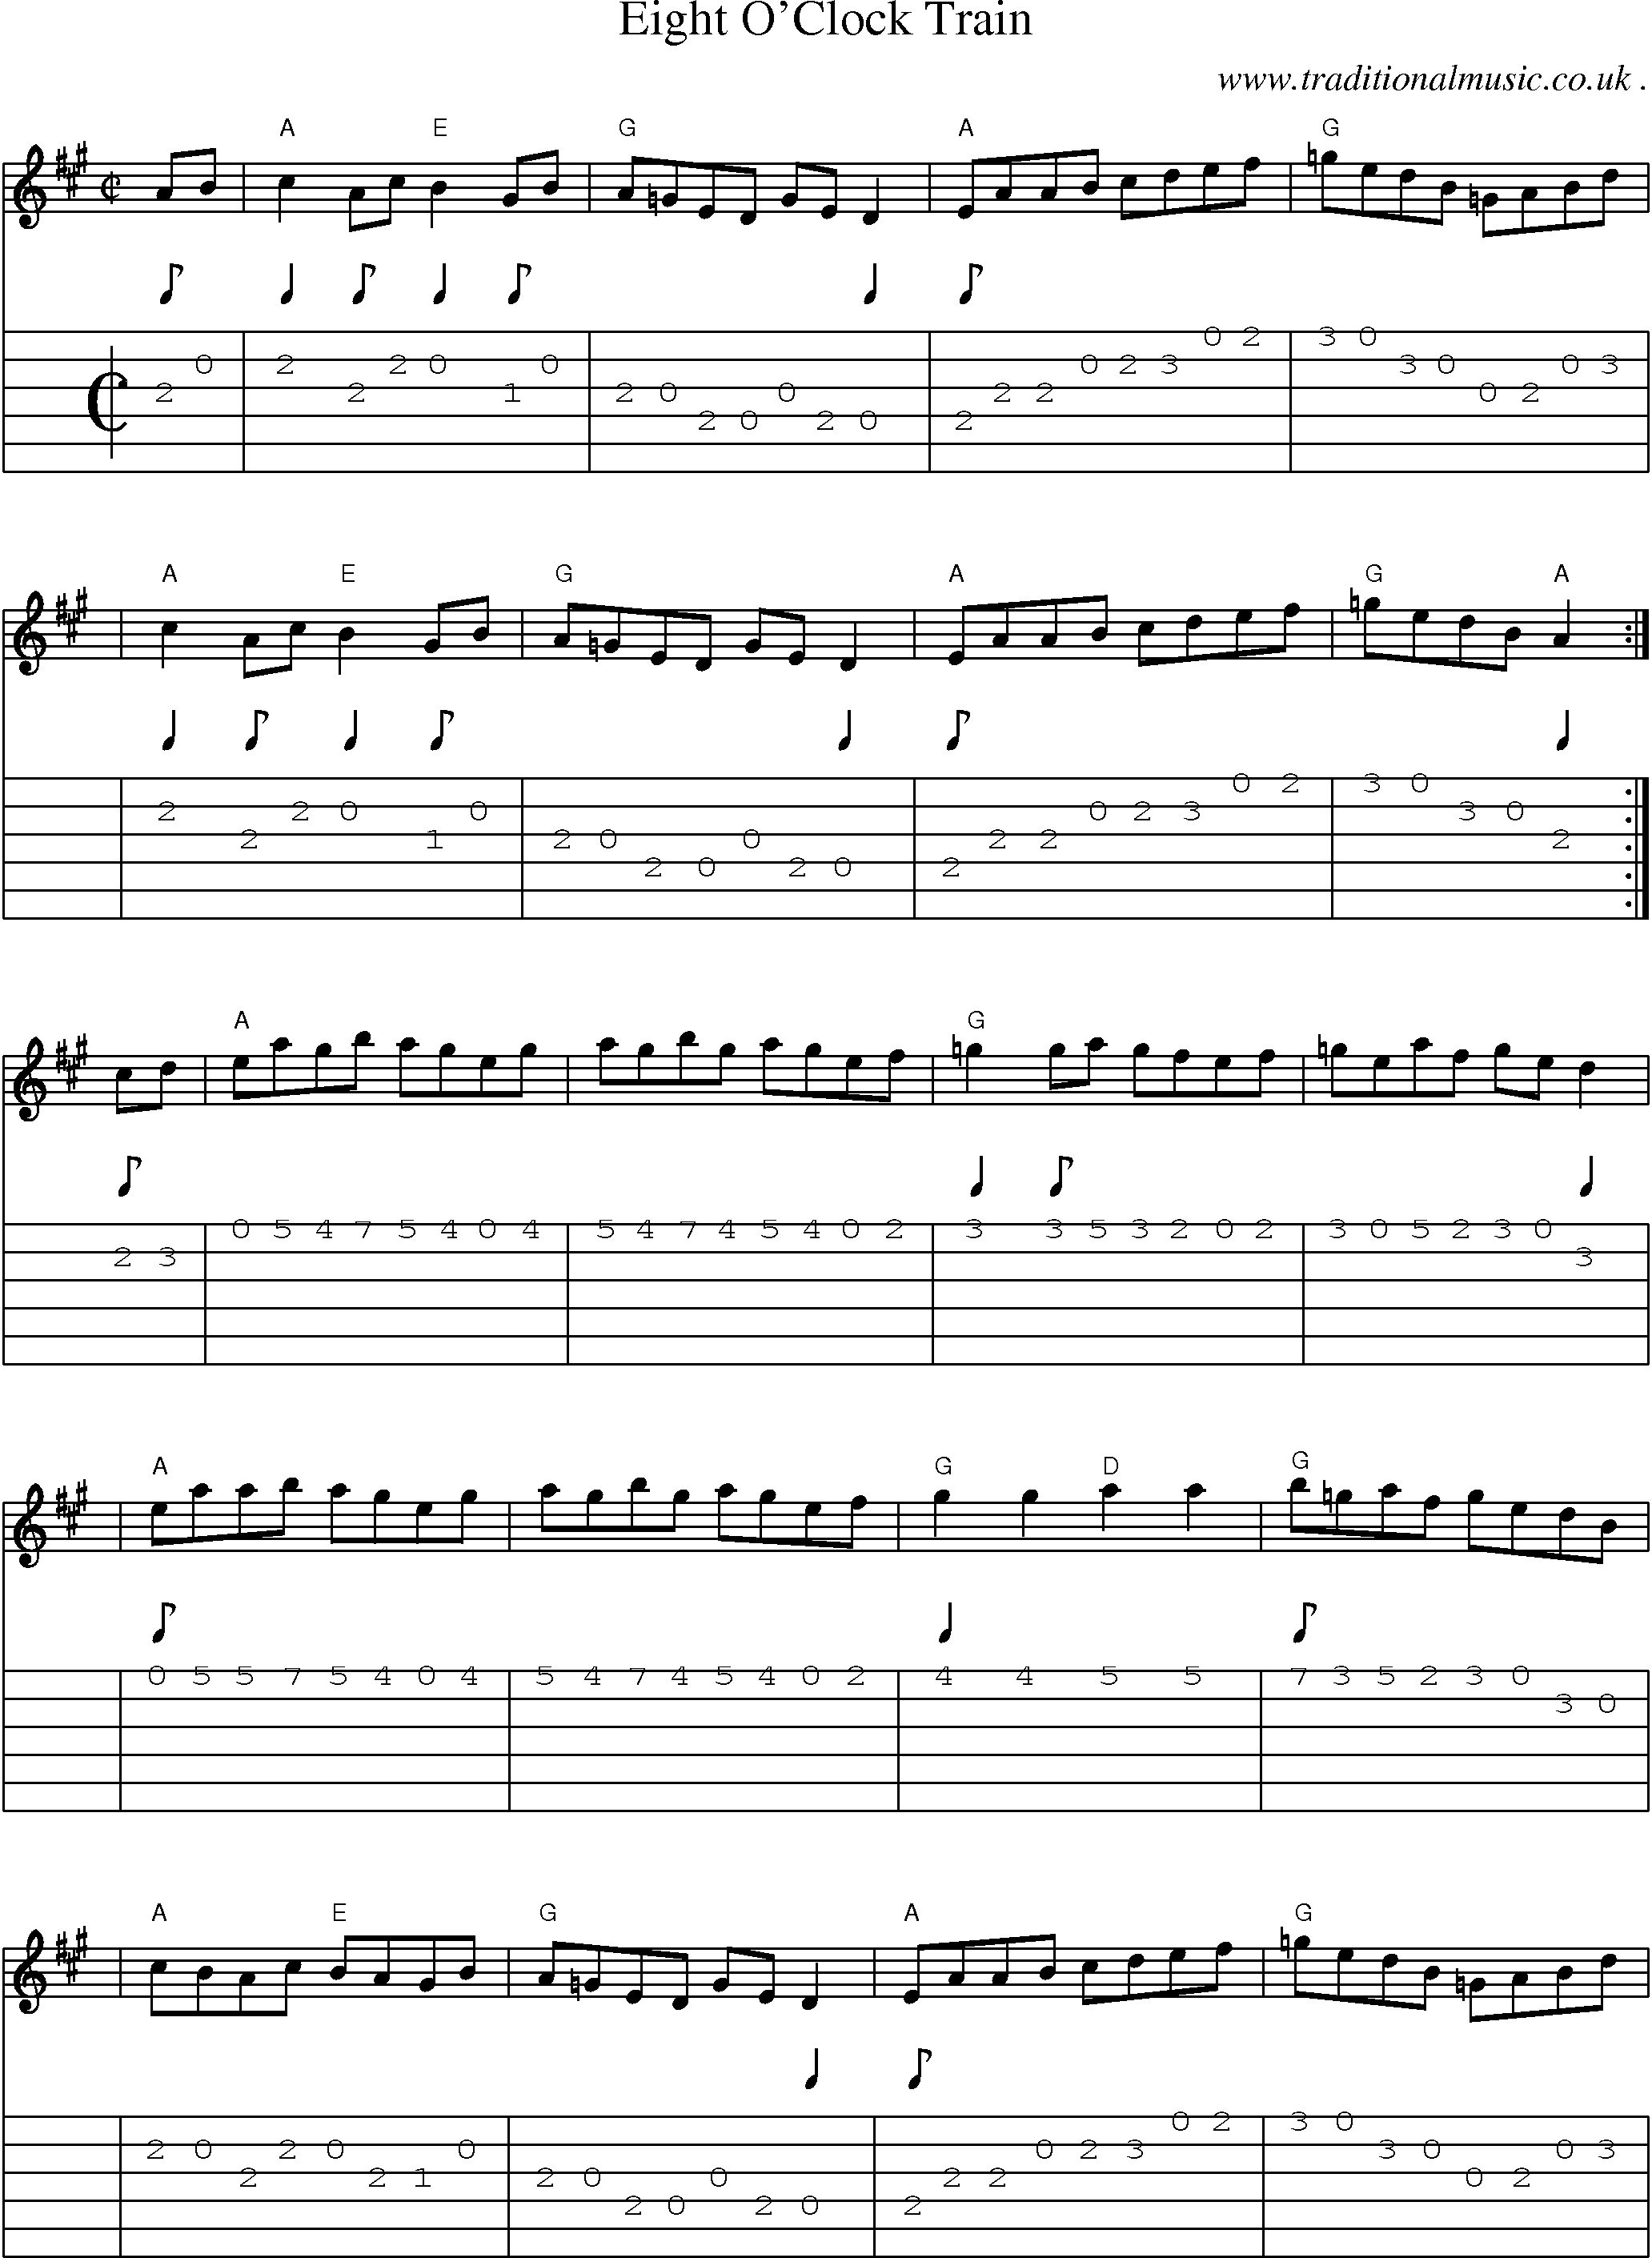 Sheet-music  score, Chords and Guitar Tabs for Eight Oclock Train